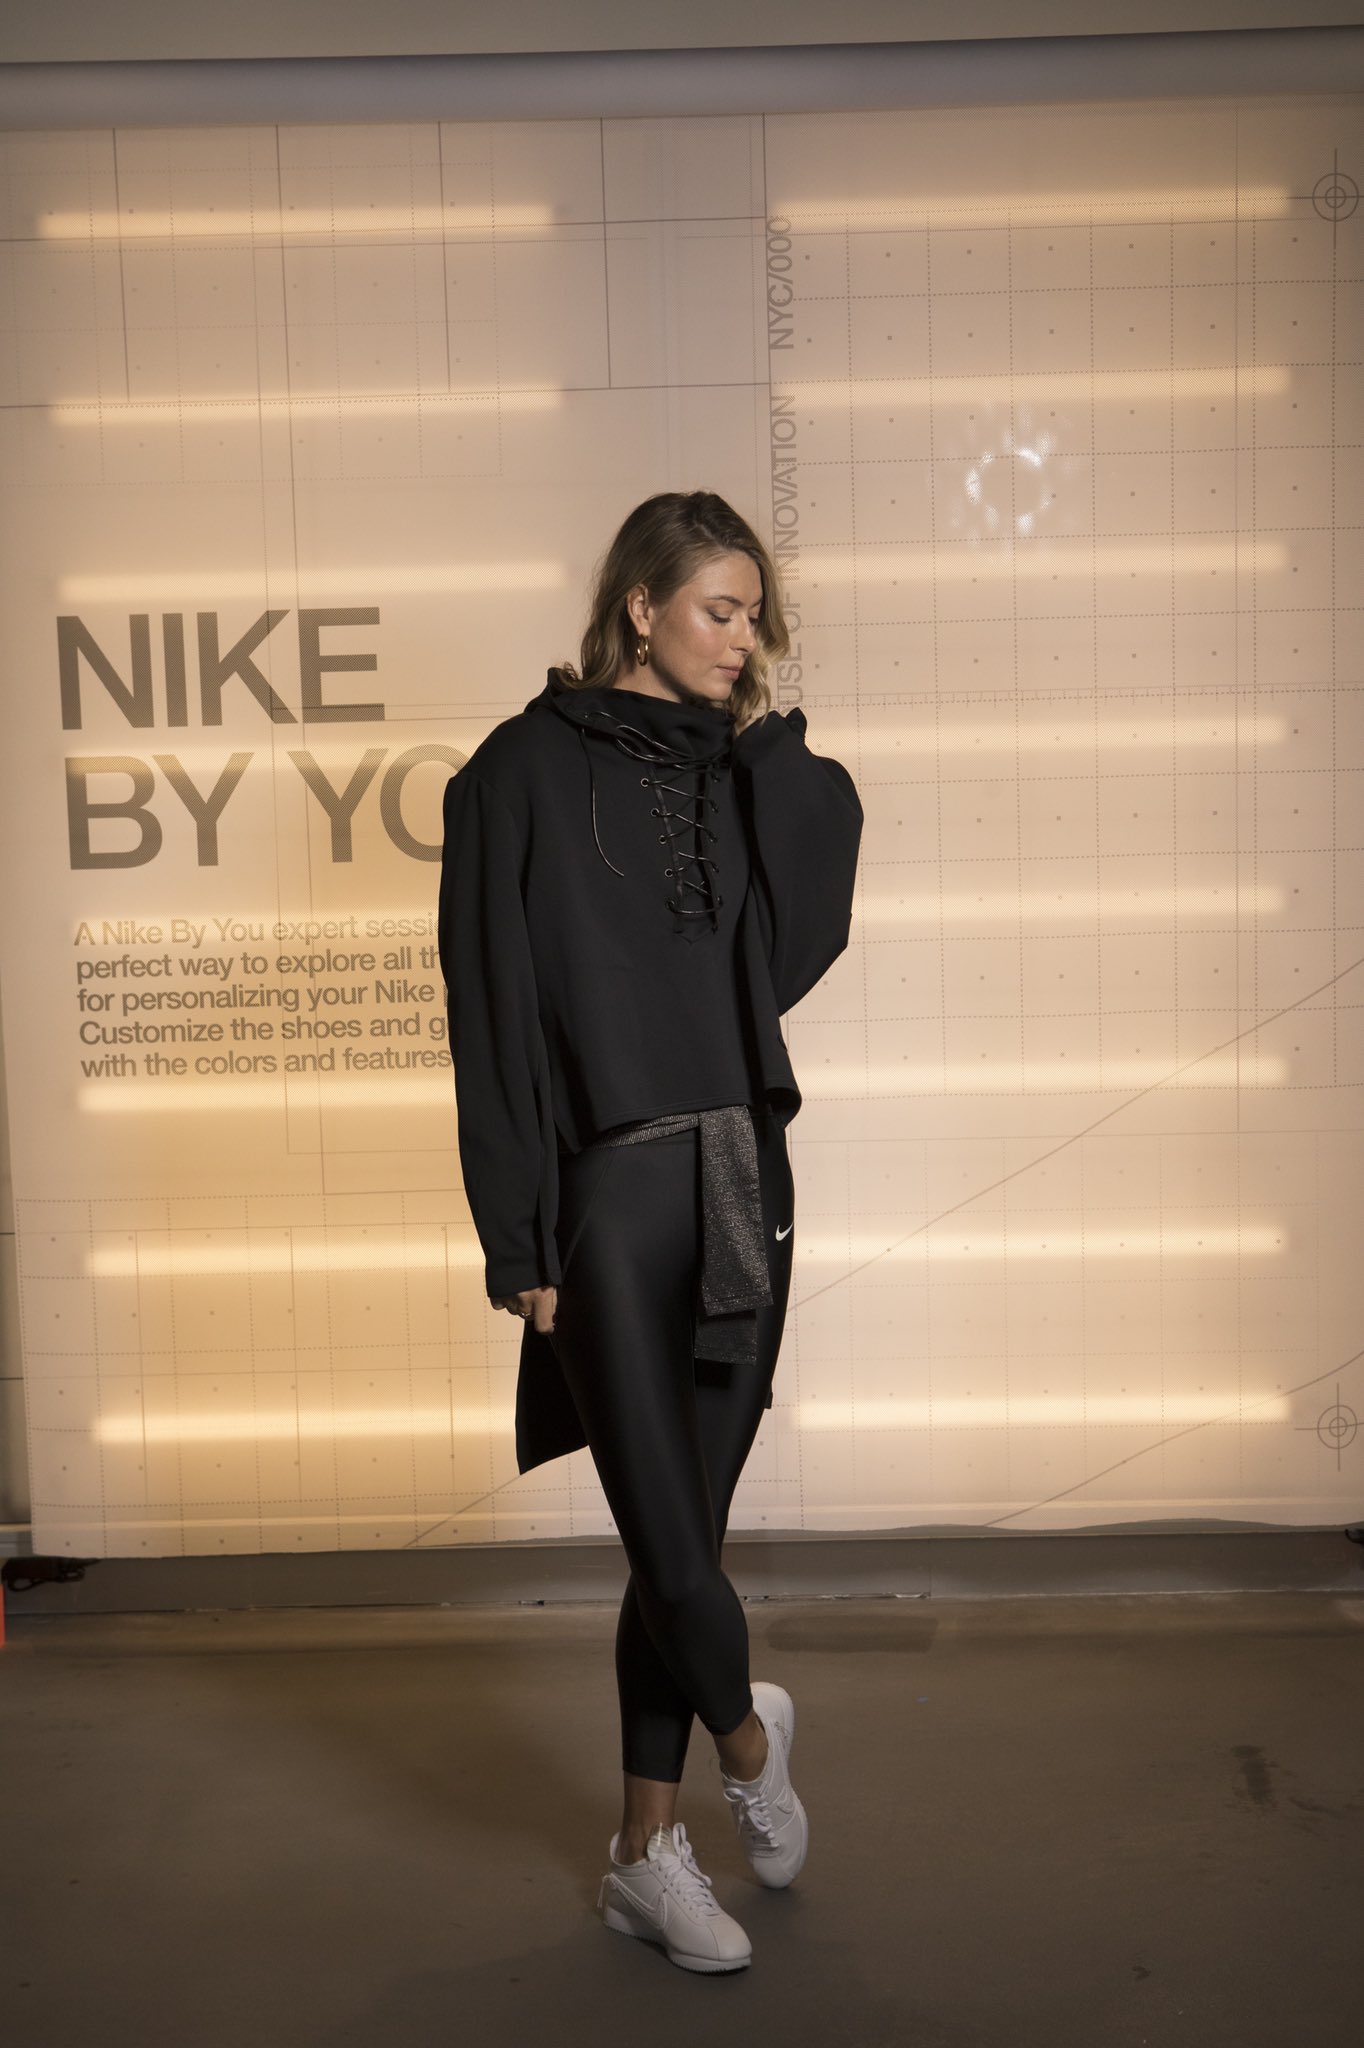 Maria Sharapova Twitterissä: "Nike 5th Ave store. Opened today and  customizing 5 unique pieces to your dimensions. This sweater is one of  them. And those white Cortez shoes...more on that later 😉